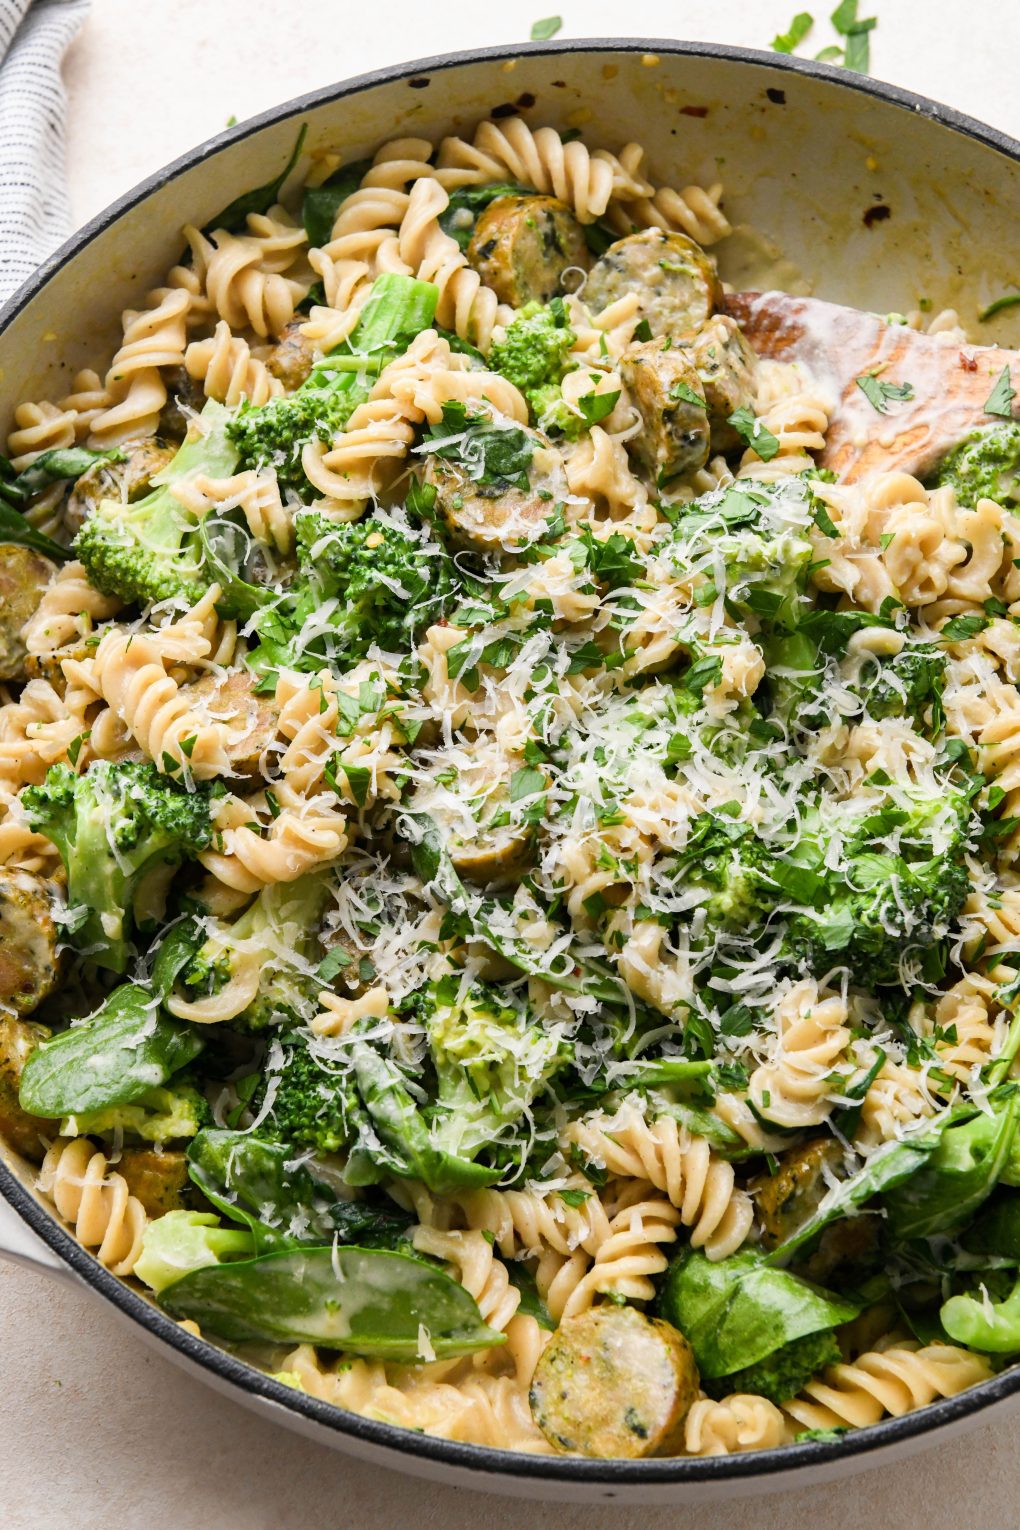 Healthy chicken sausage pasta in a ceramic skillet topped with vegan parmesan and fresh parsley on a cream colored background.